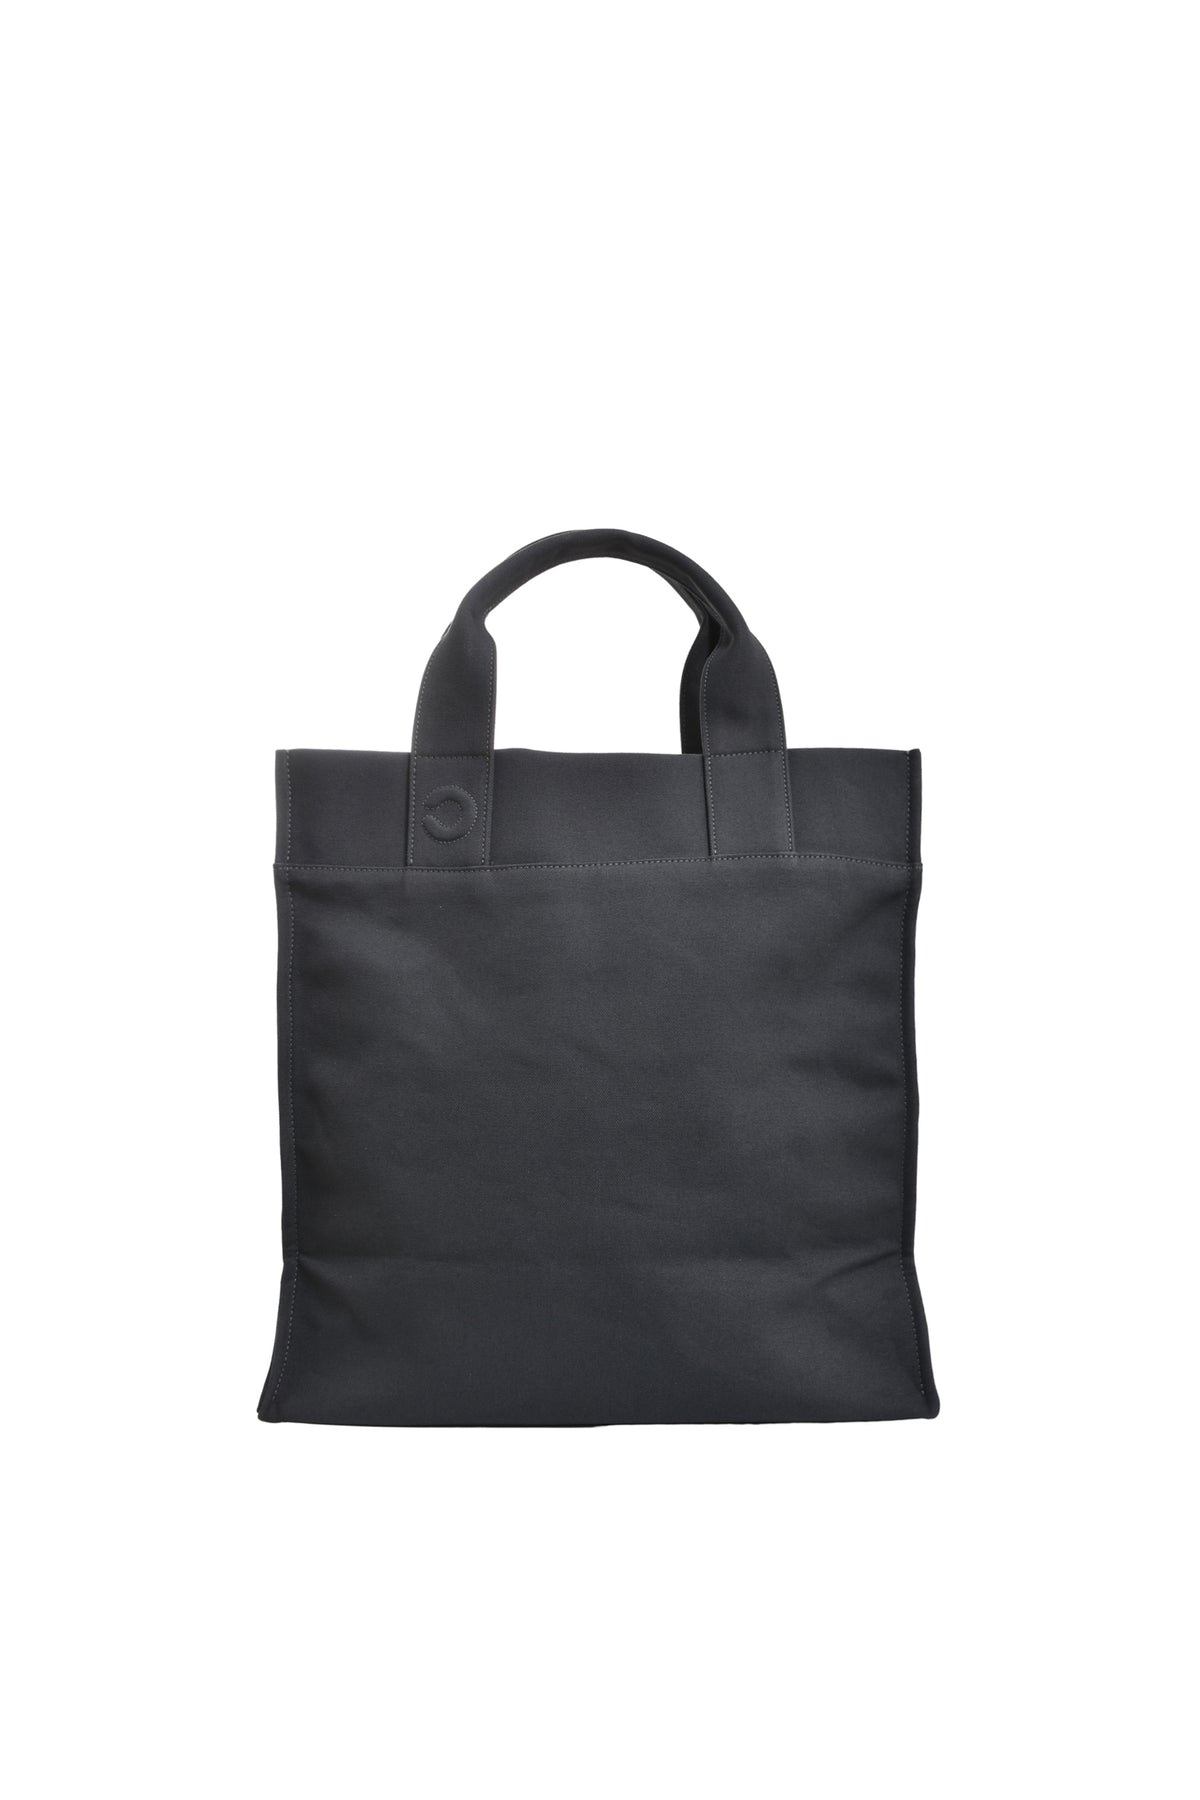 TOTE BAG / ANTHRACITE GRY